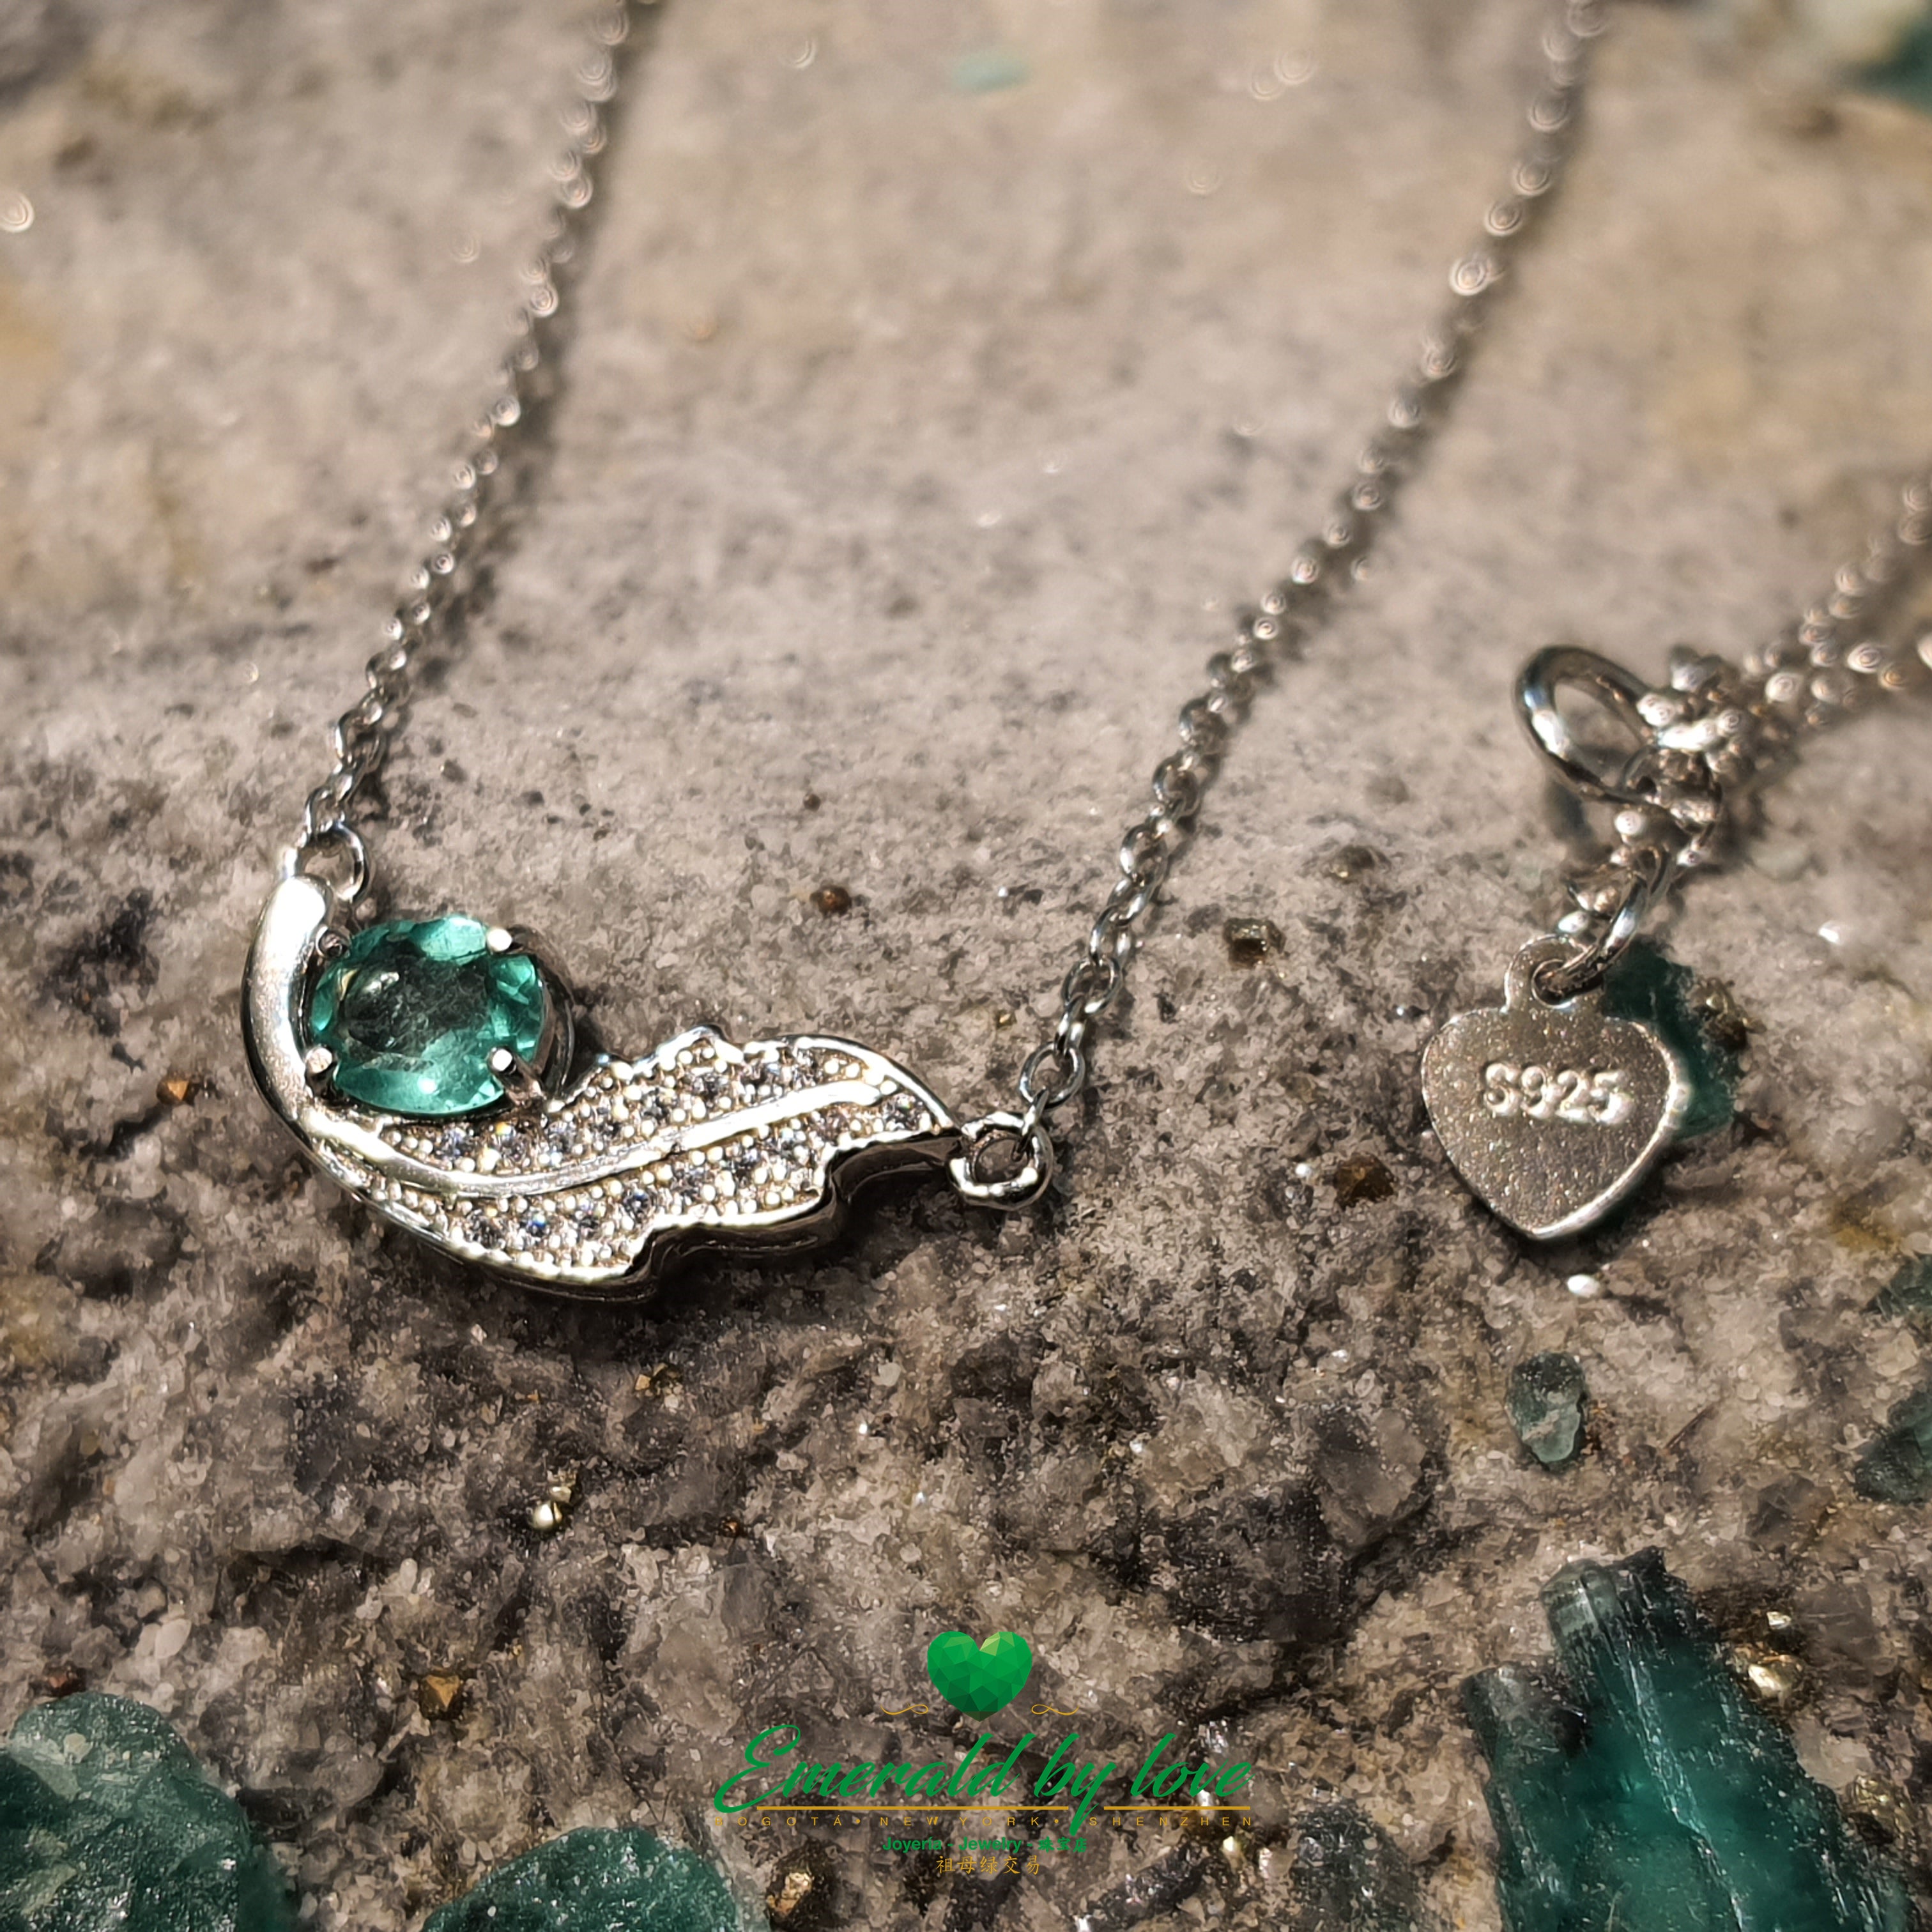 Delicate Feather Emerald Oval Pendant in Sterling Silver